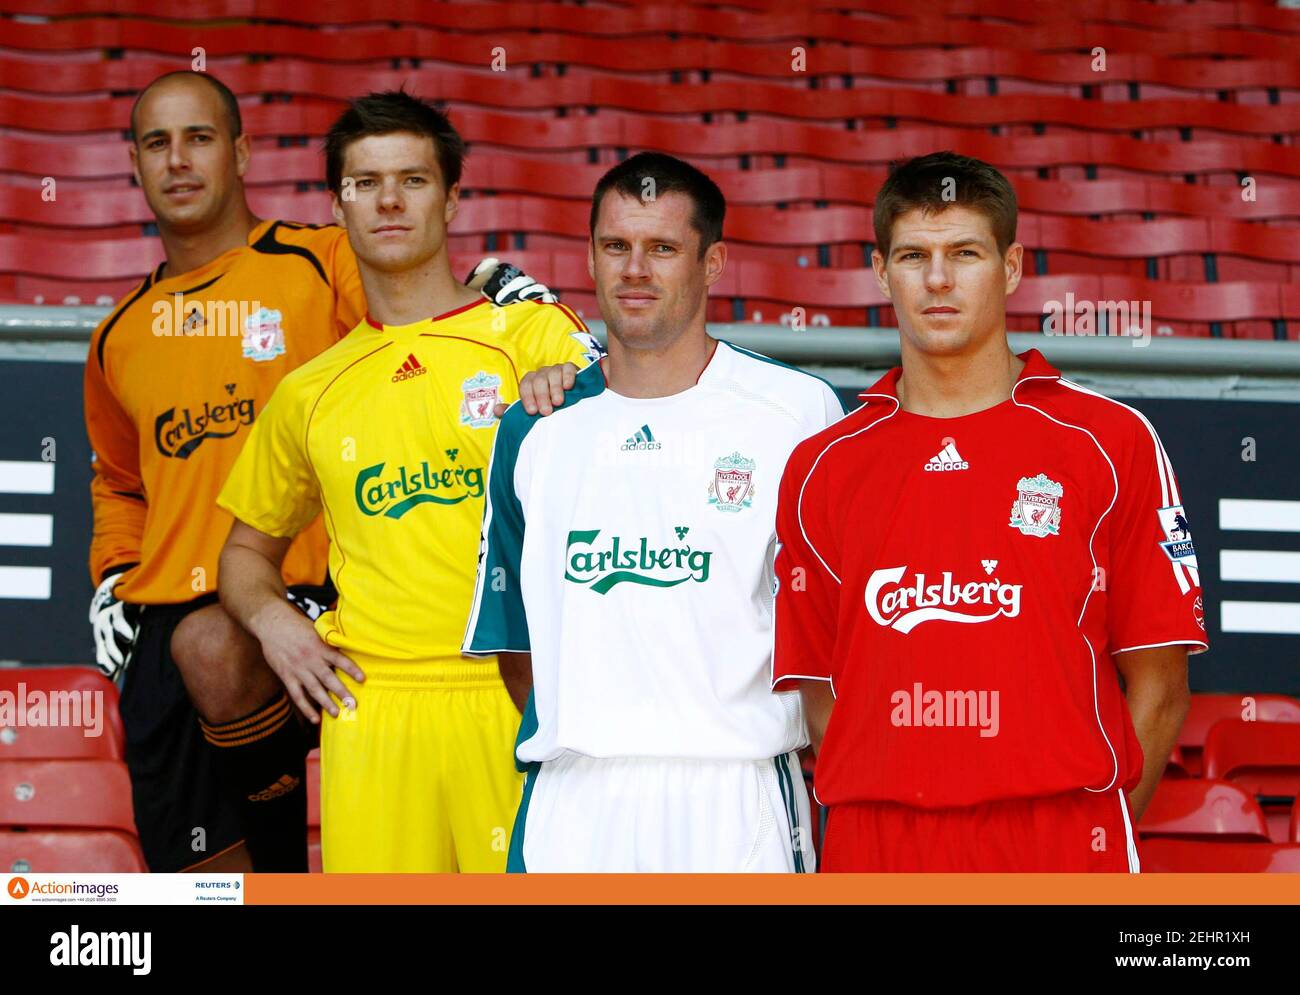 Football - Liverpool - adidas Official Kit Launch 2006/07 - Anfield -  24/7/06 Liverpool's Steven Gerrard in the new Adidas home kit, Xabi Alonso  in the away kit, Jamie Carragher in the